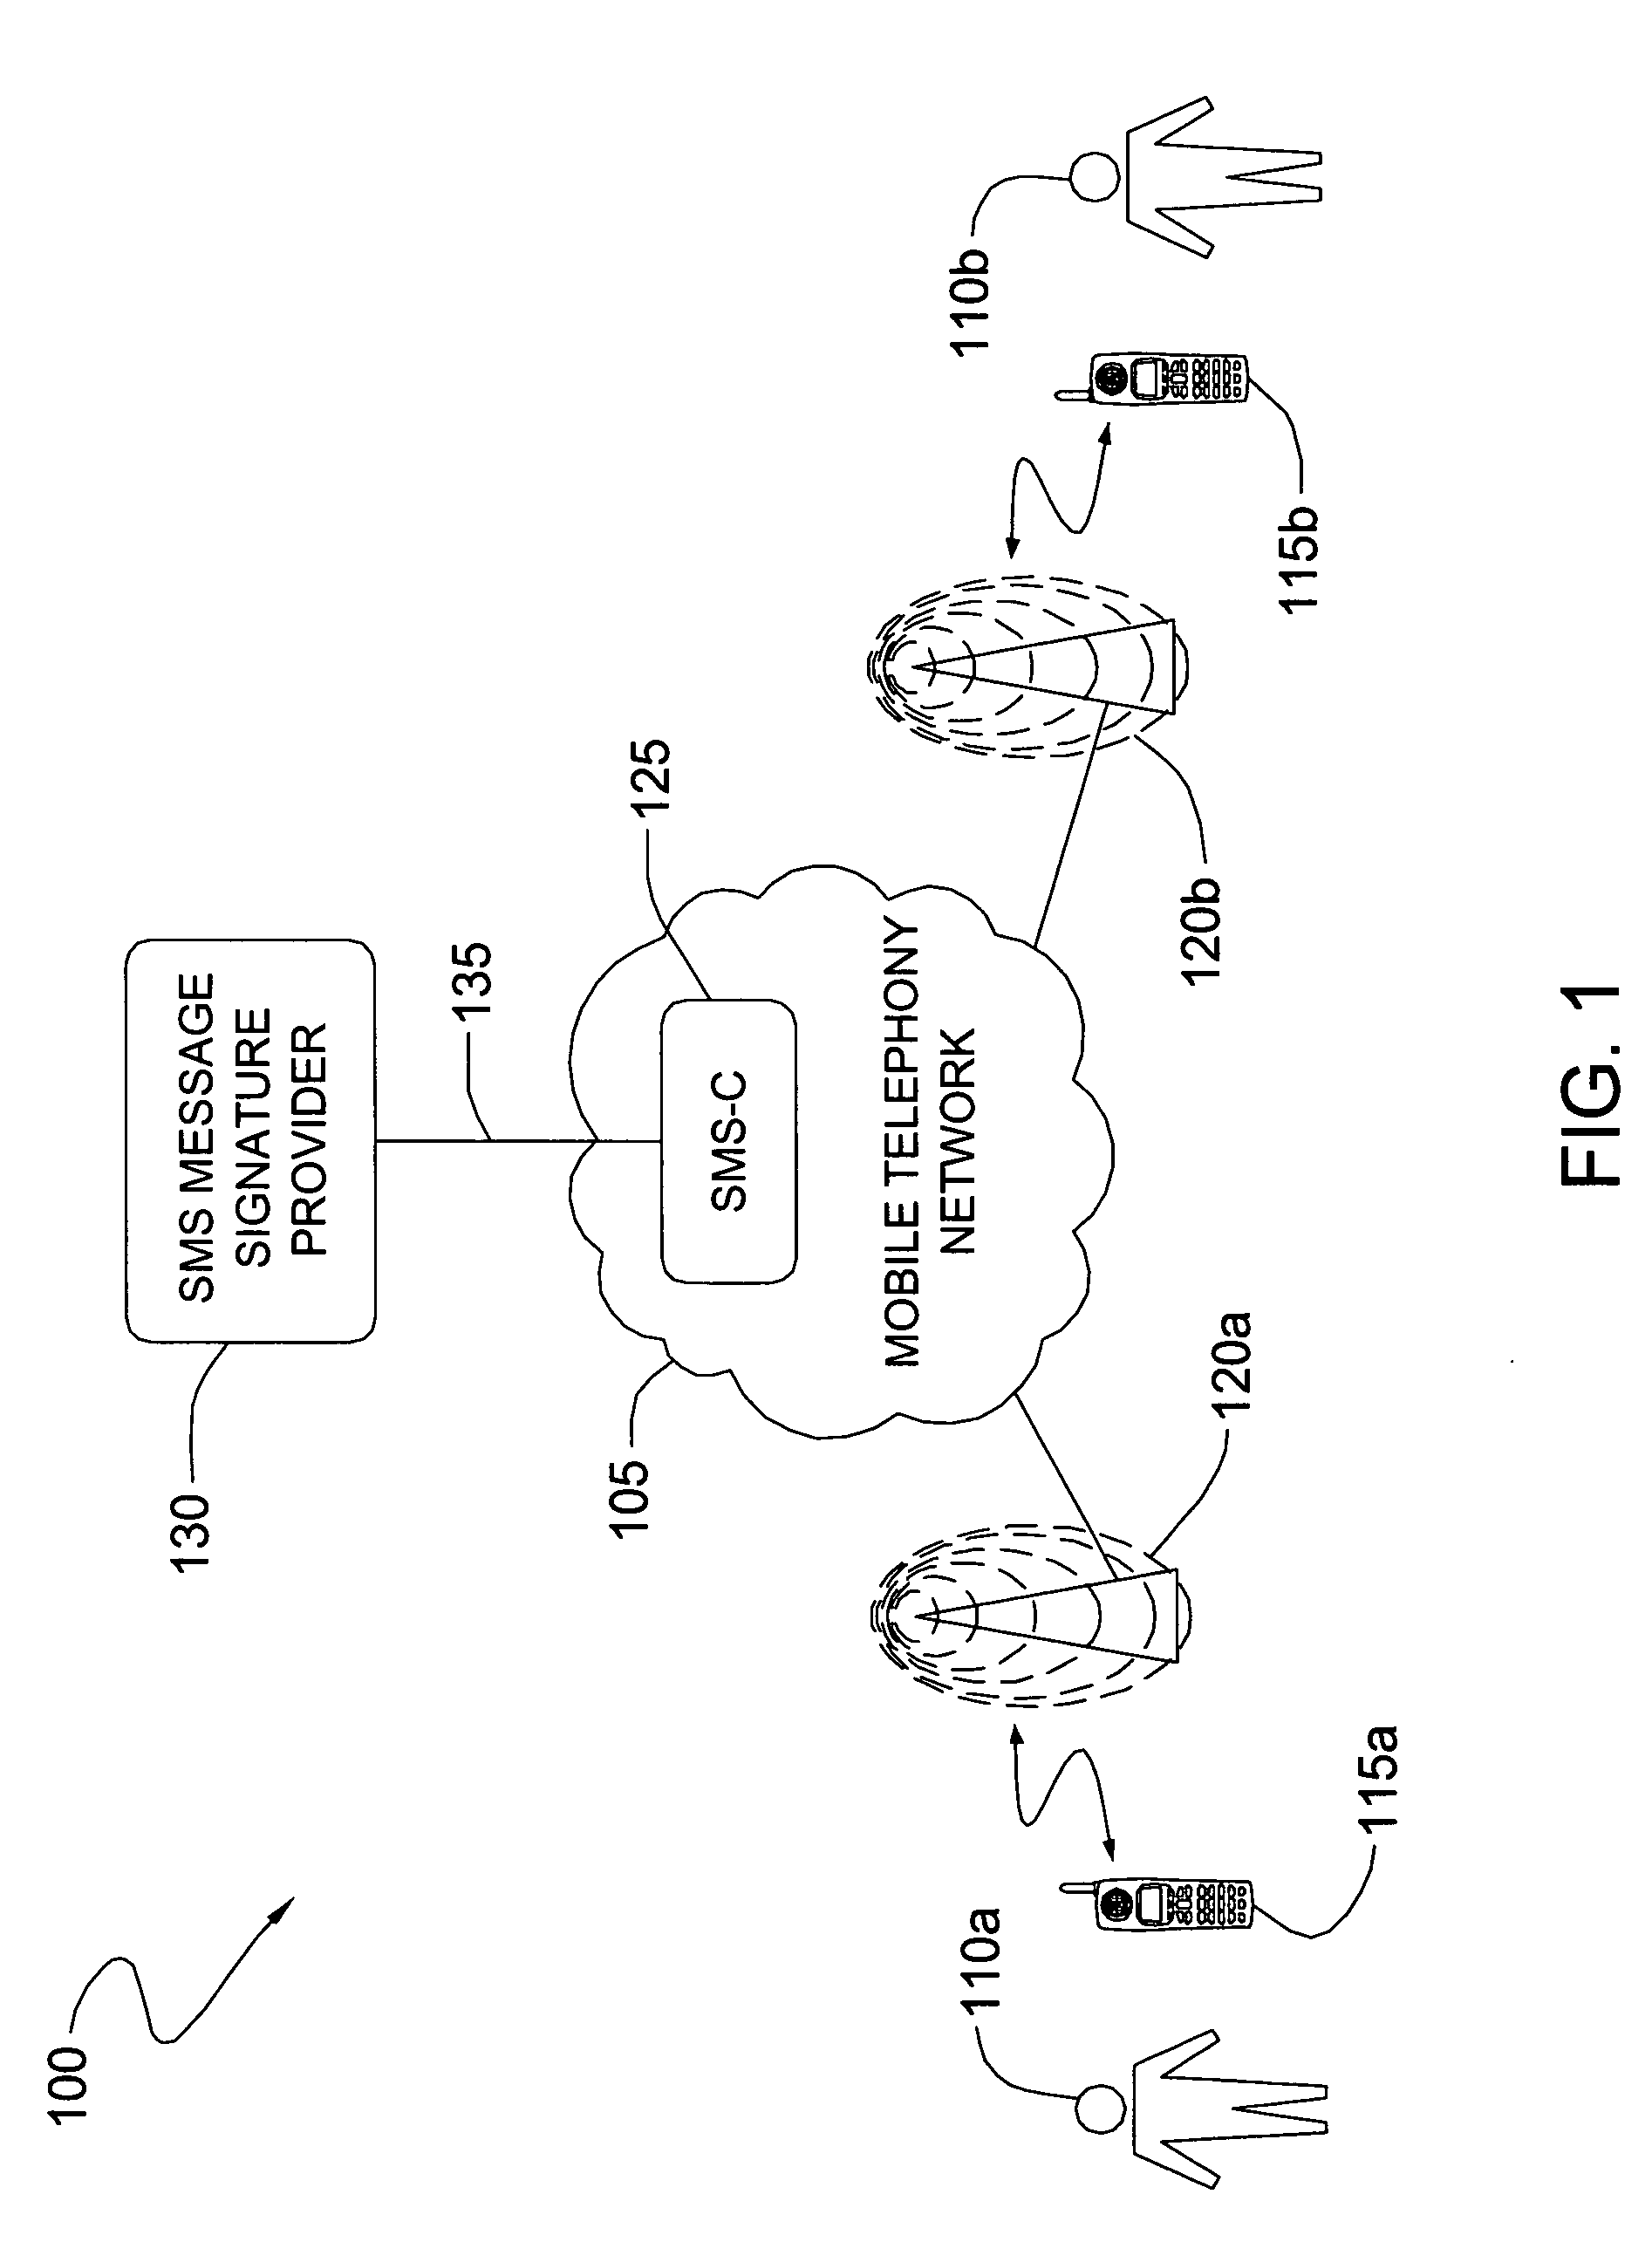 Method and system for authenticating messages exchanged in a communications system